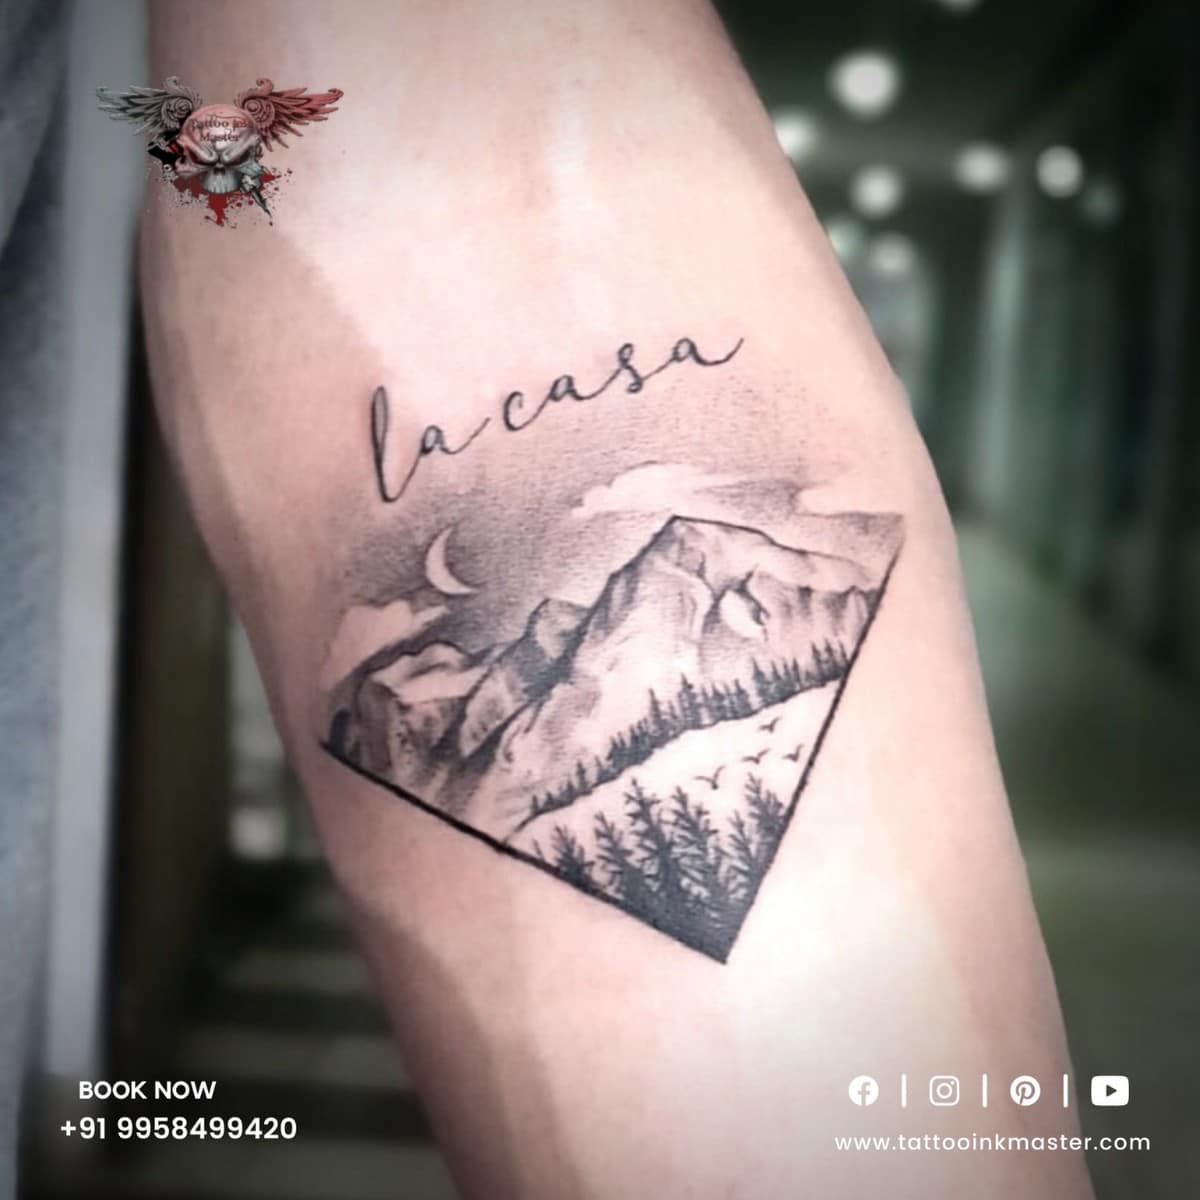 You are currently viewing Lacasa Natura Tattoo on Hand